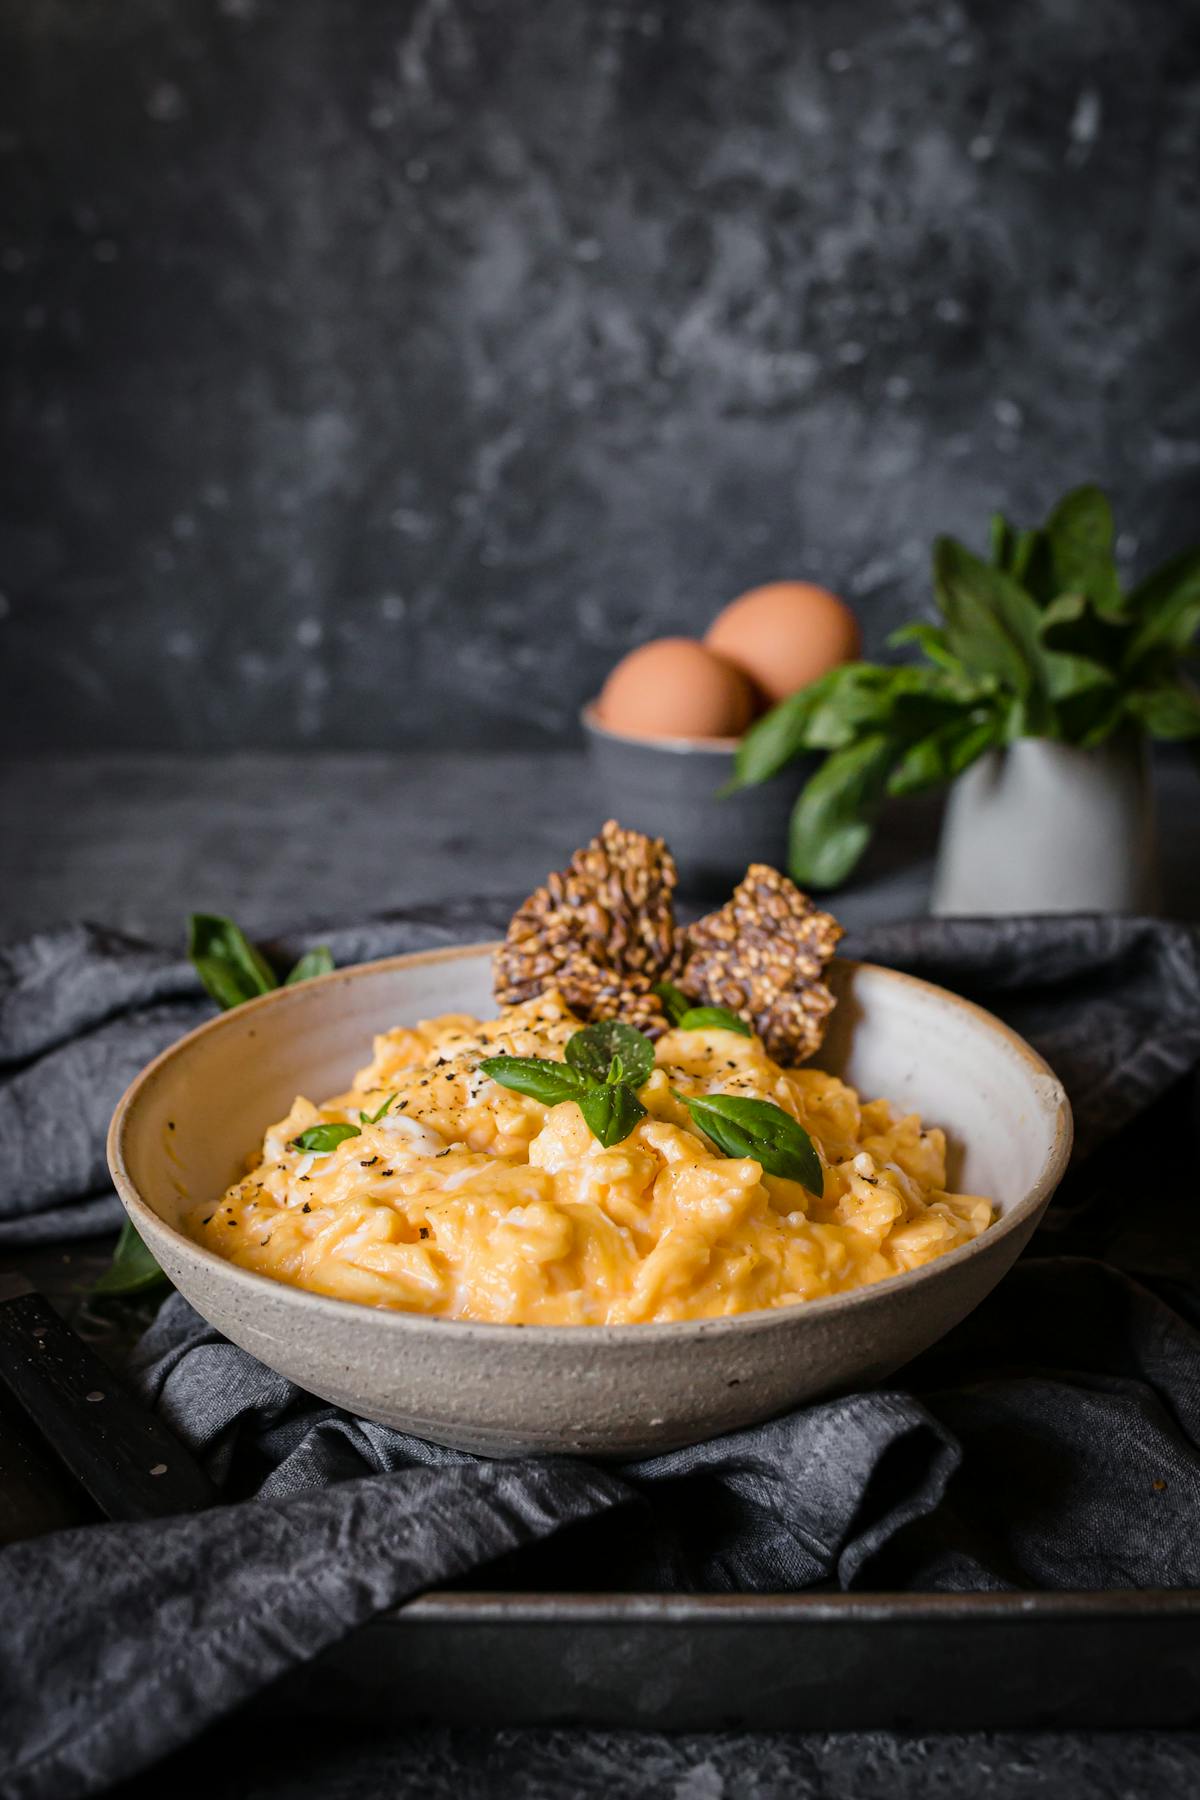 Scrambled eggs with basil and butter